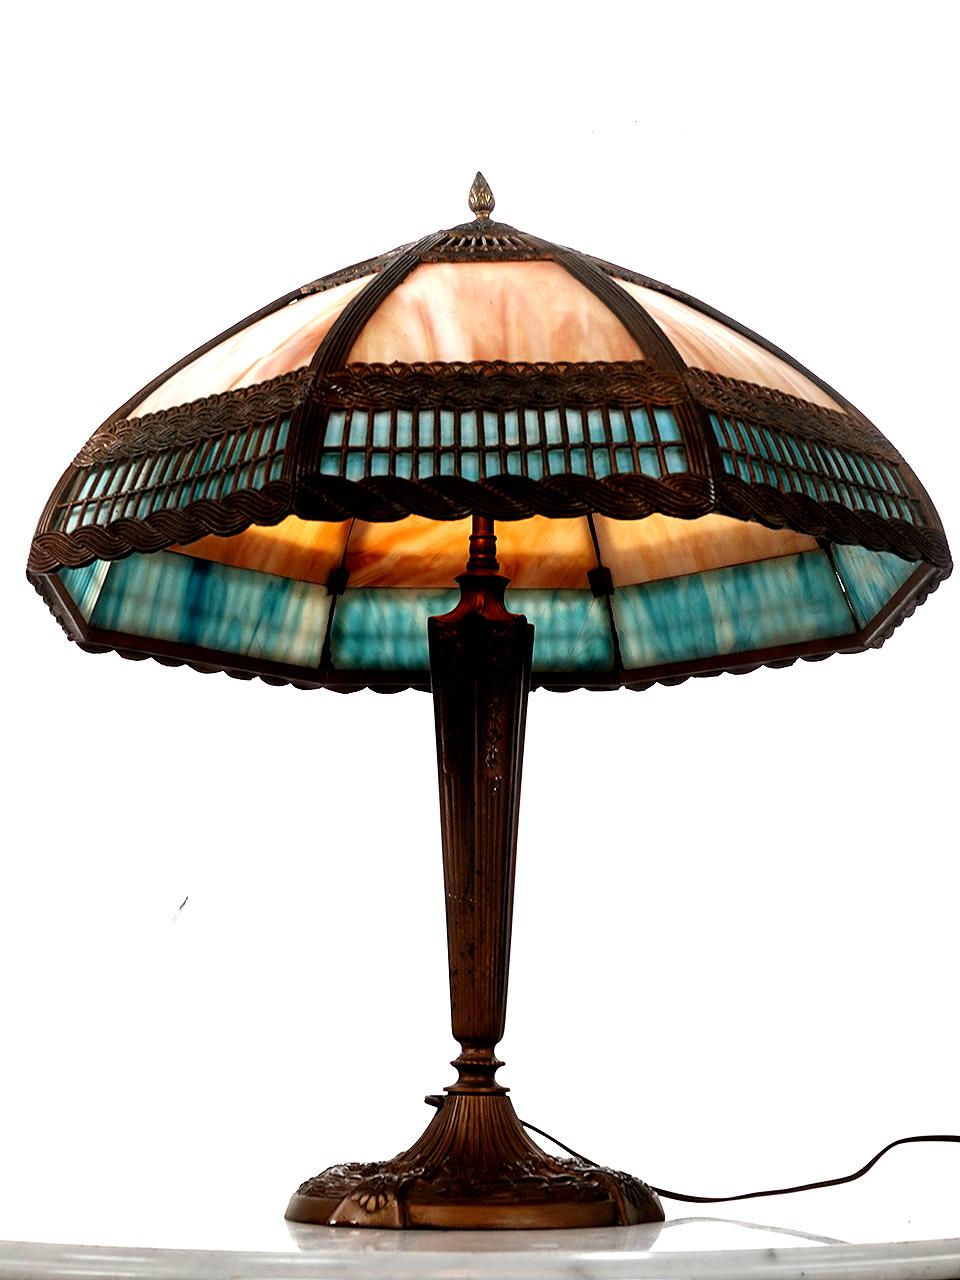 This is a nicely designed Arts and Crafts table lamp. Its impressive at 2 foot tall with a 21 inch diameter. It has a curved shade with 8 cast filigree panels. The design has an interesting tied stick and rope theme. Each slump glass (curved) panel